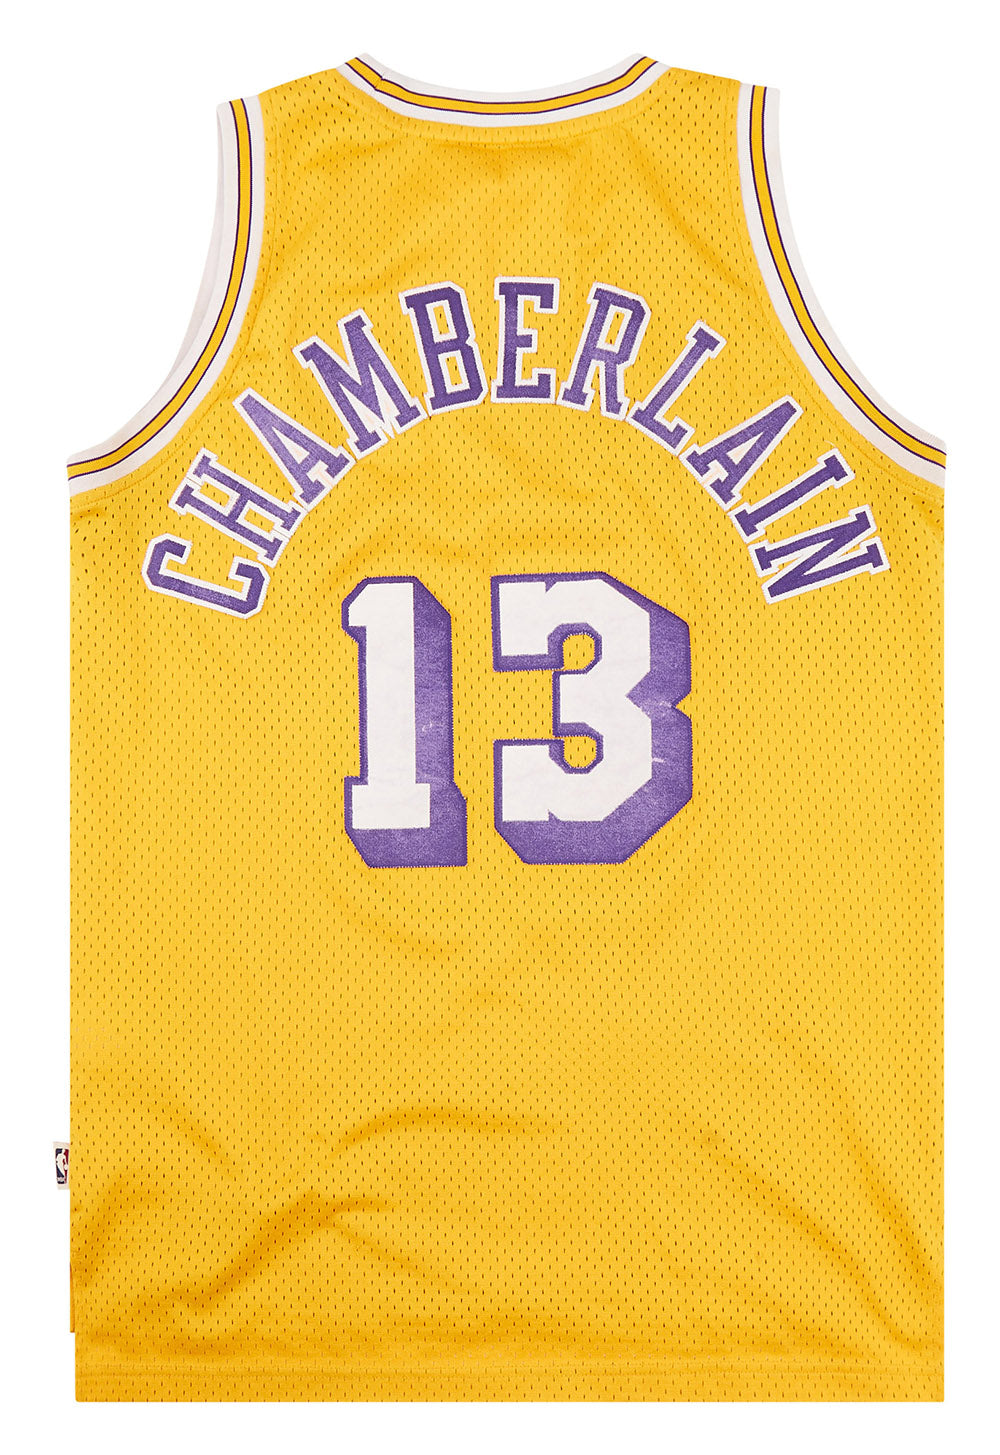 Vintage Los Angeles Lakers #20 Jersey  Urban Outfitters Japan - Clothing,  Music, Home & Accessories